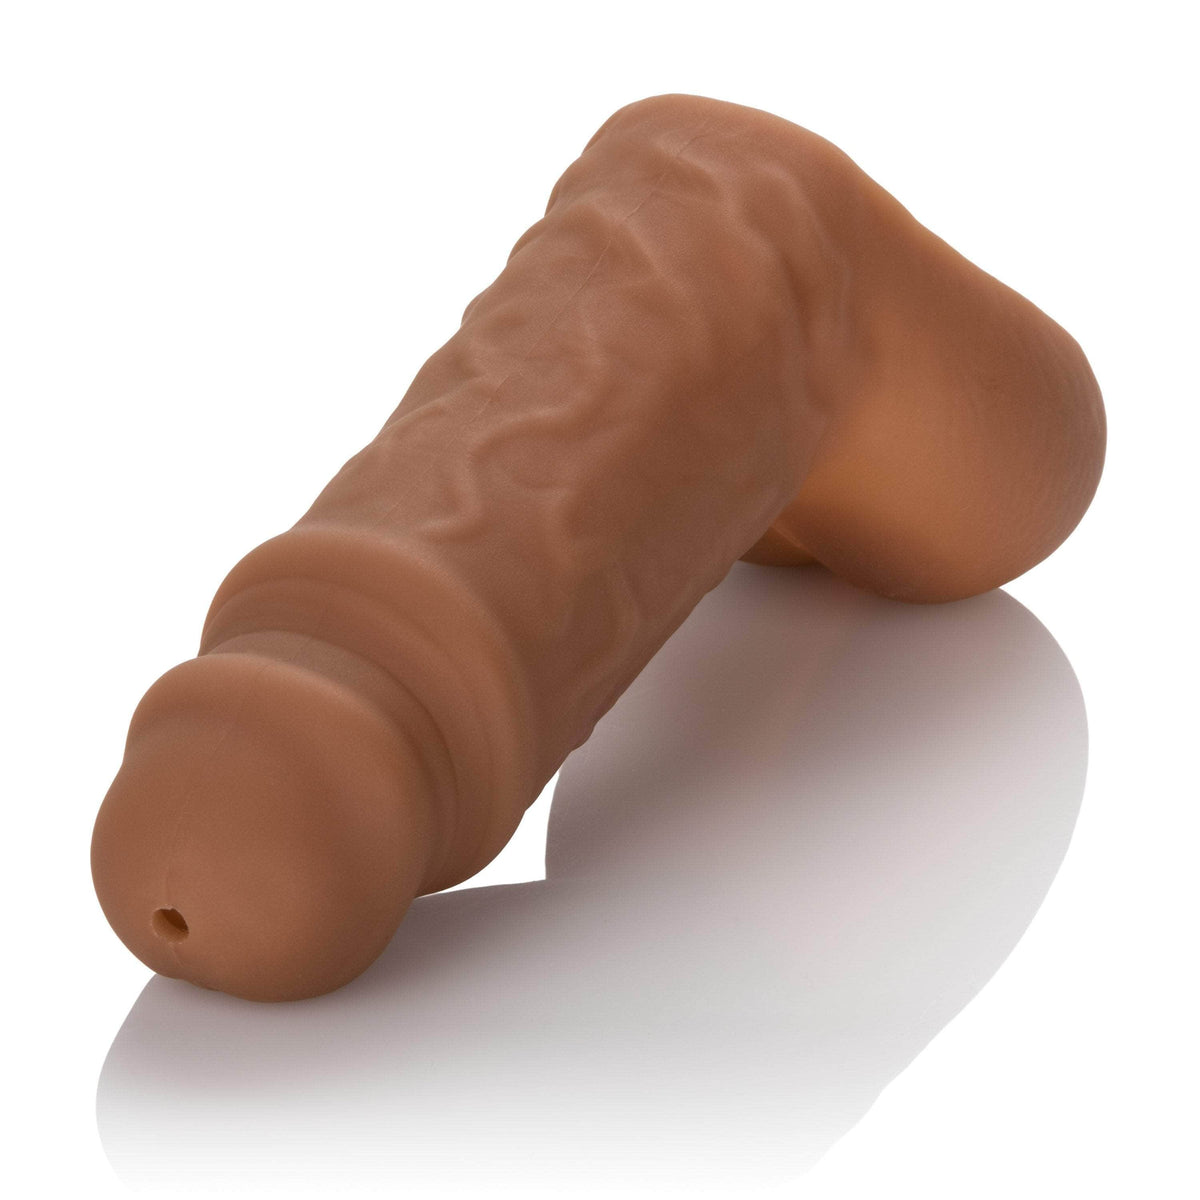 California Exotics - Packer Gear STP Hollow Packer    Strap On with Hollow Dildo for Male (Non Vibration)